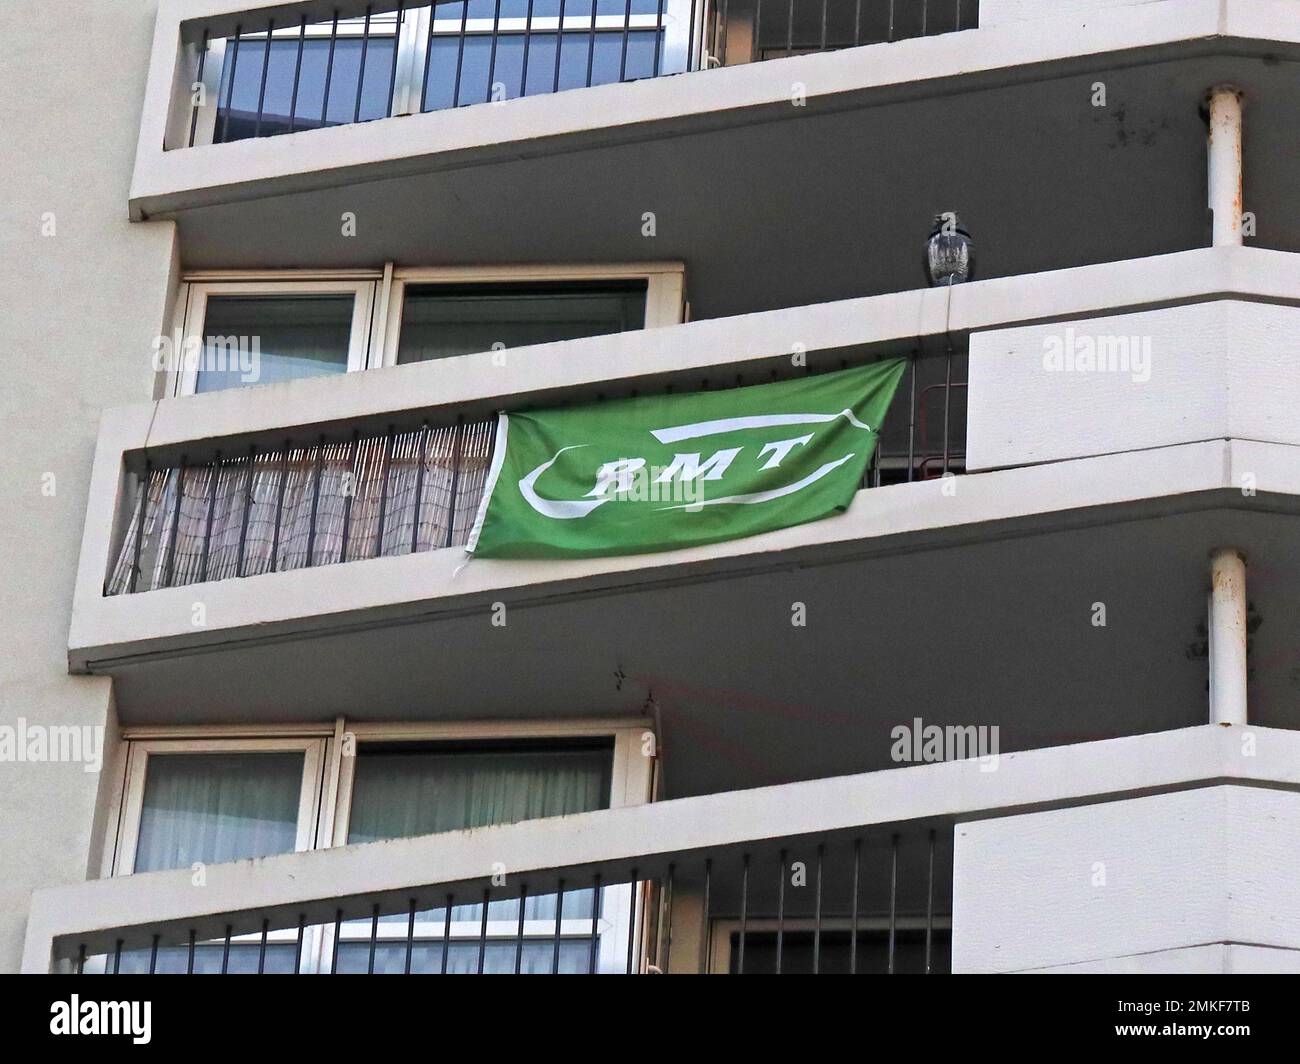 Support for RMT union strikes, green flag flying from balcony of flats in a block, Scholes, central Wigan, Lancashire, England, UK, WN1 Stock Photo